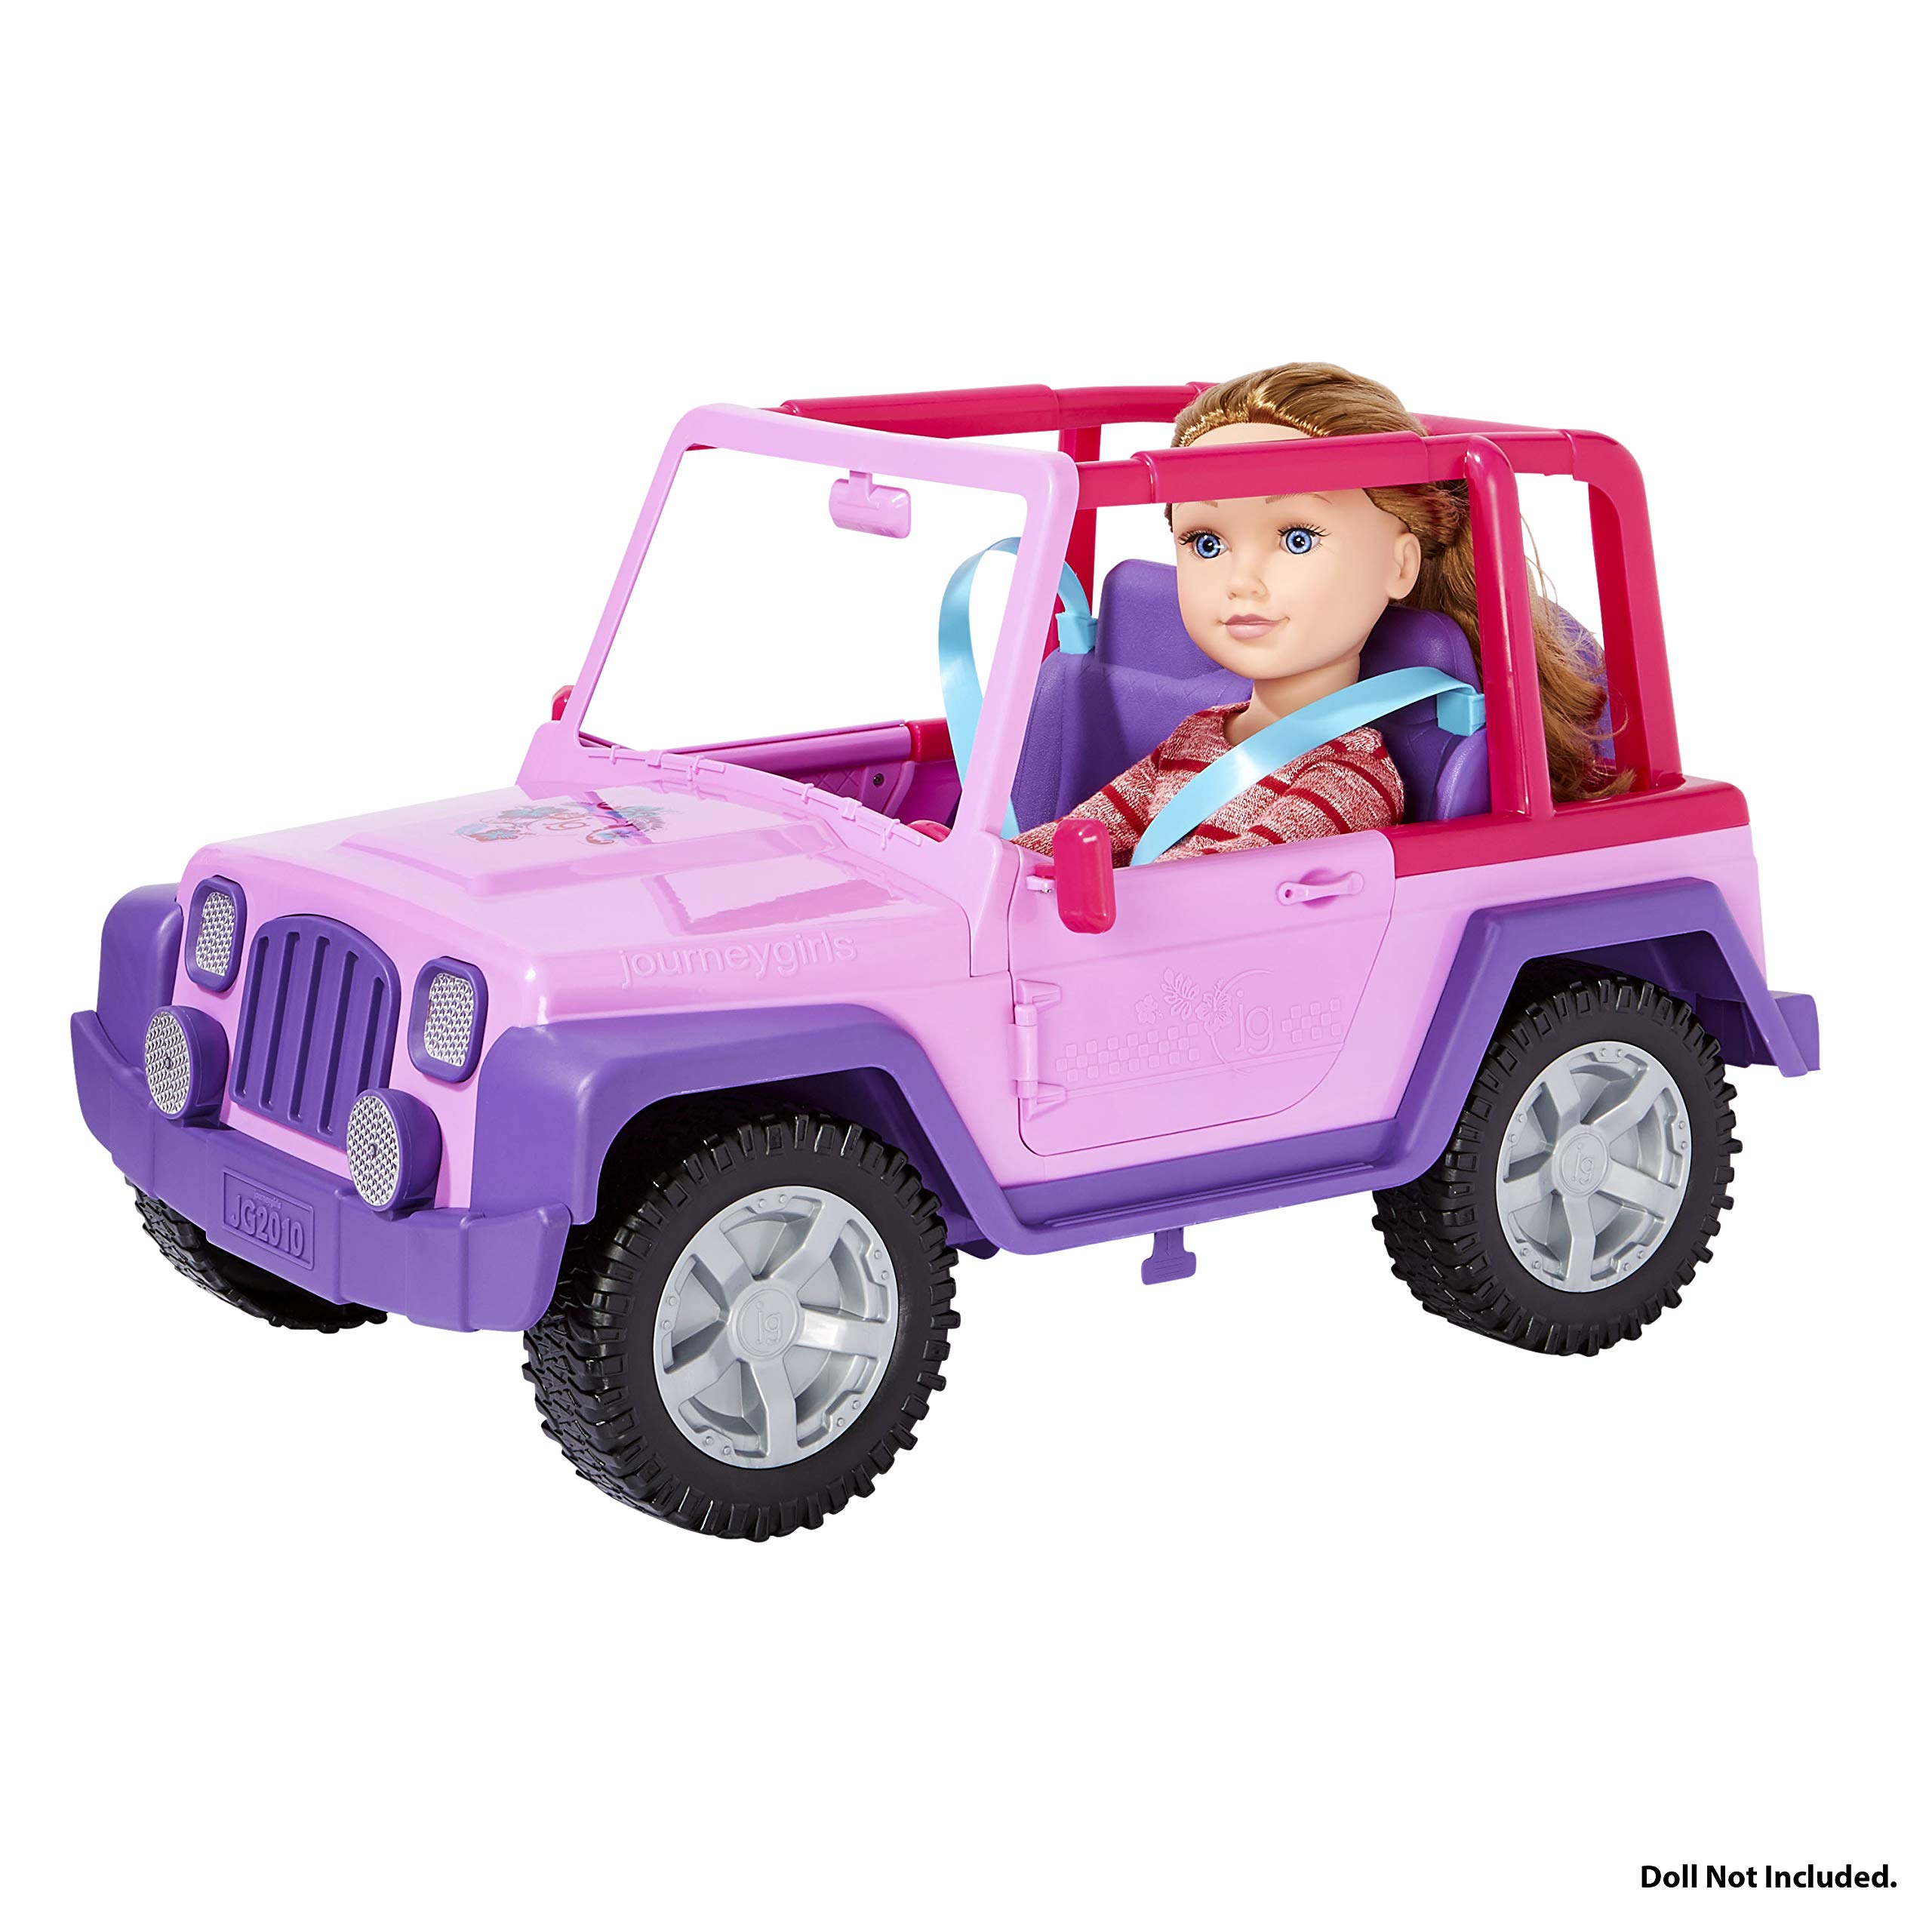 Journey Girls Outback 4-Wheel Vehicle, Kids Toys for Ages 6 Up, Gifts and Presents by Just Play